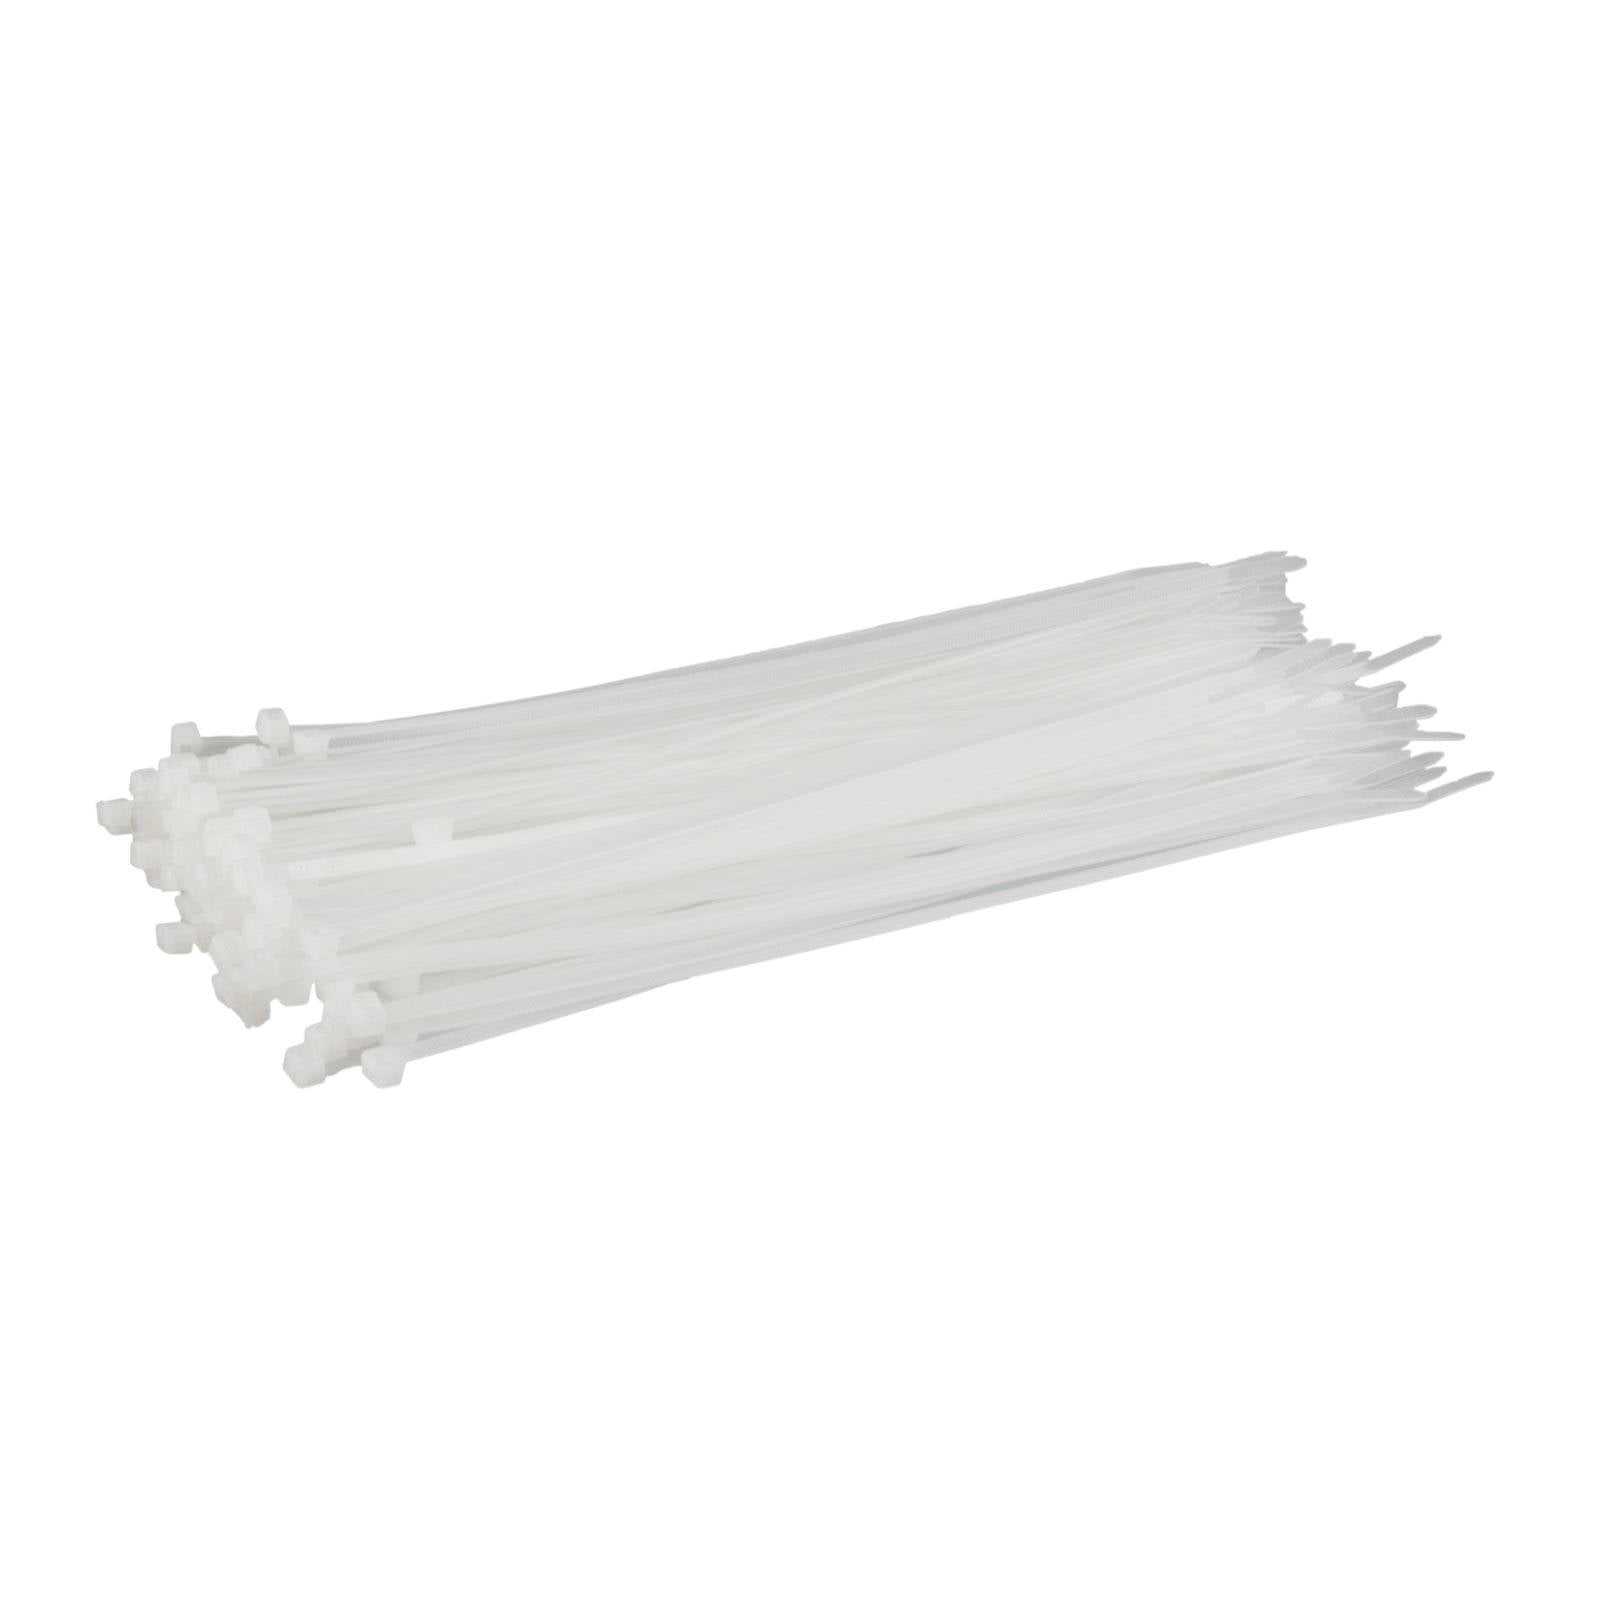 Whites Motorcycle Parts, WHITES CABLE TIES 300 X 4.8 mm 100pcs/BAG WHITE